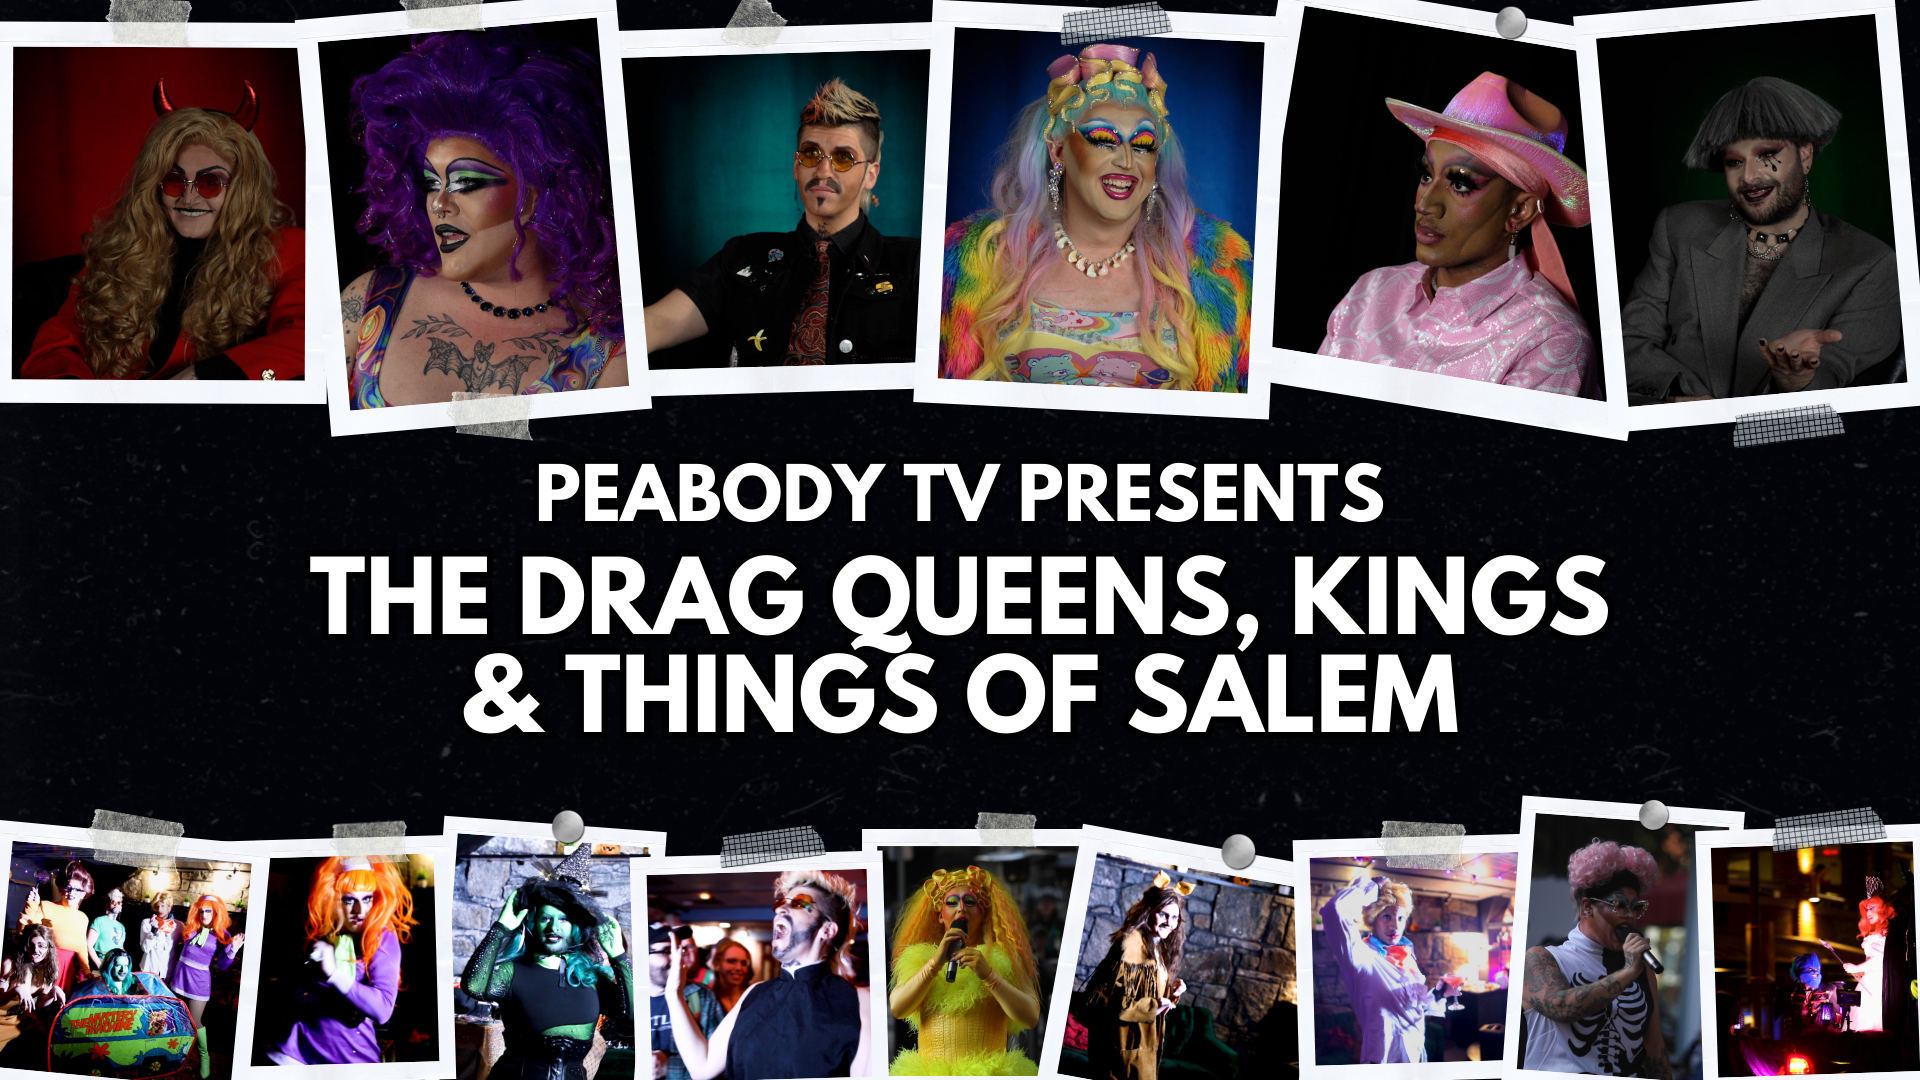 Watch the most fabulous drag queens, kings, and other performers of Salem on Peabody TV. It's diverse entertainment at its best!